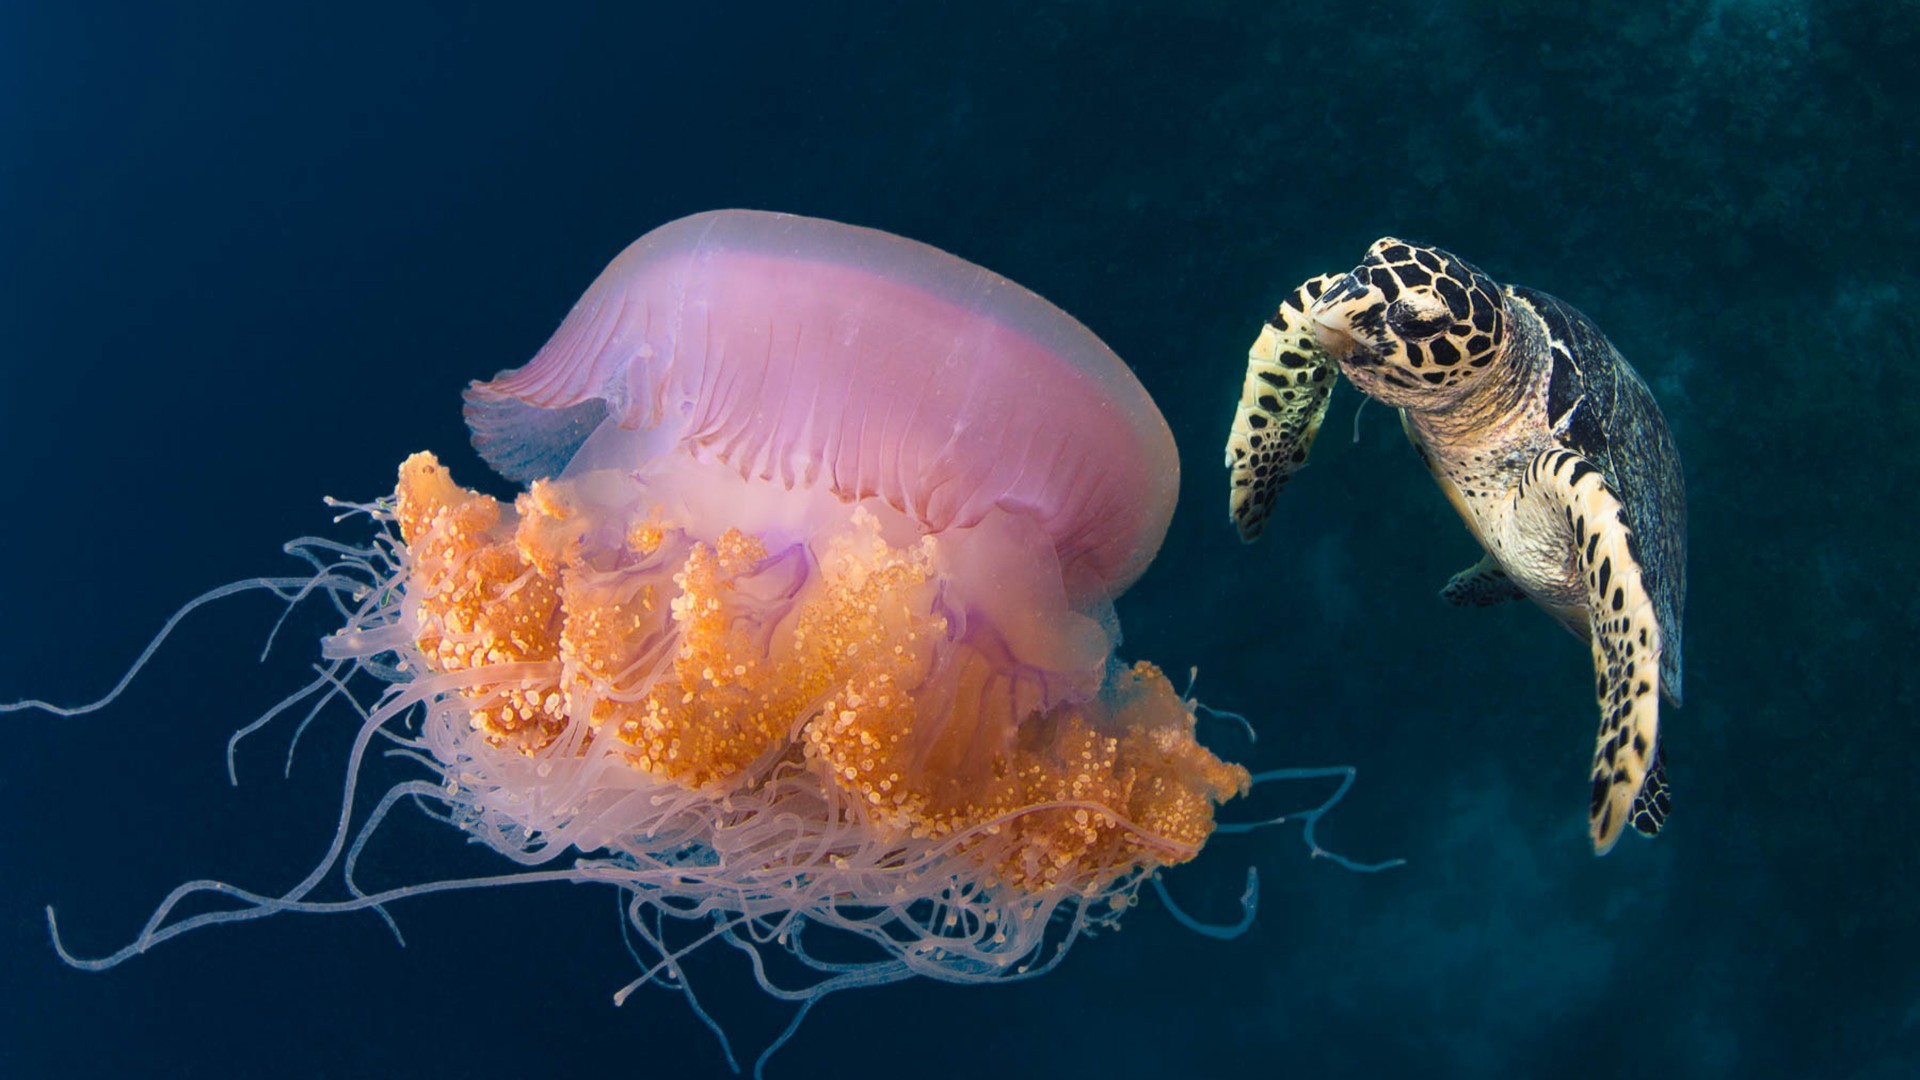 1920x1080 jellyfish and turtle desktop backgrounds hd wallpapers13 com